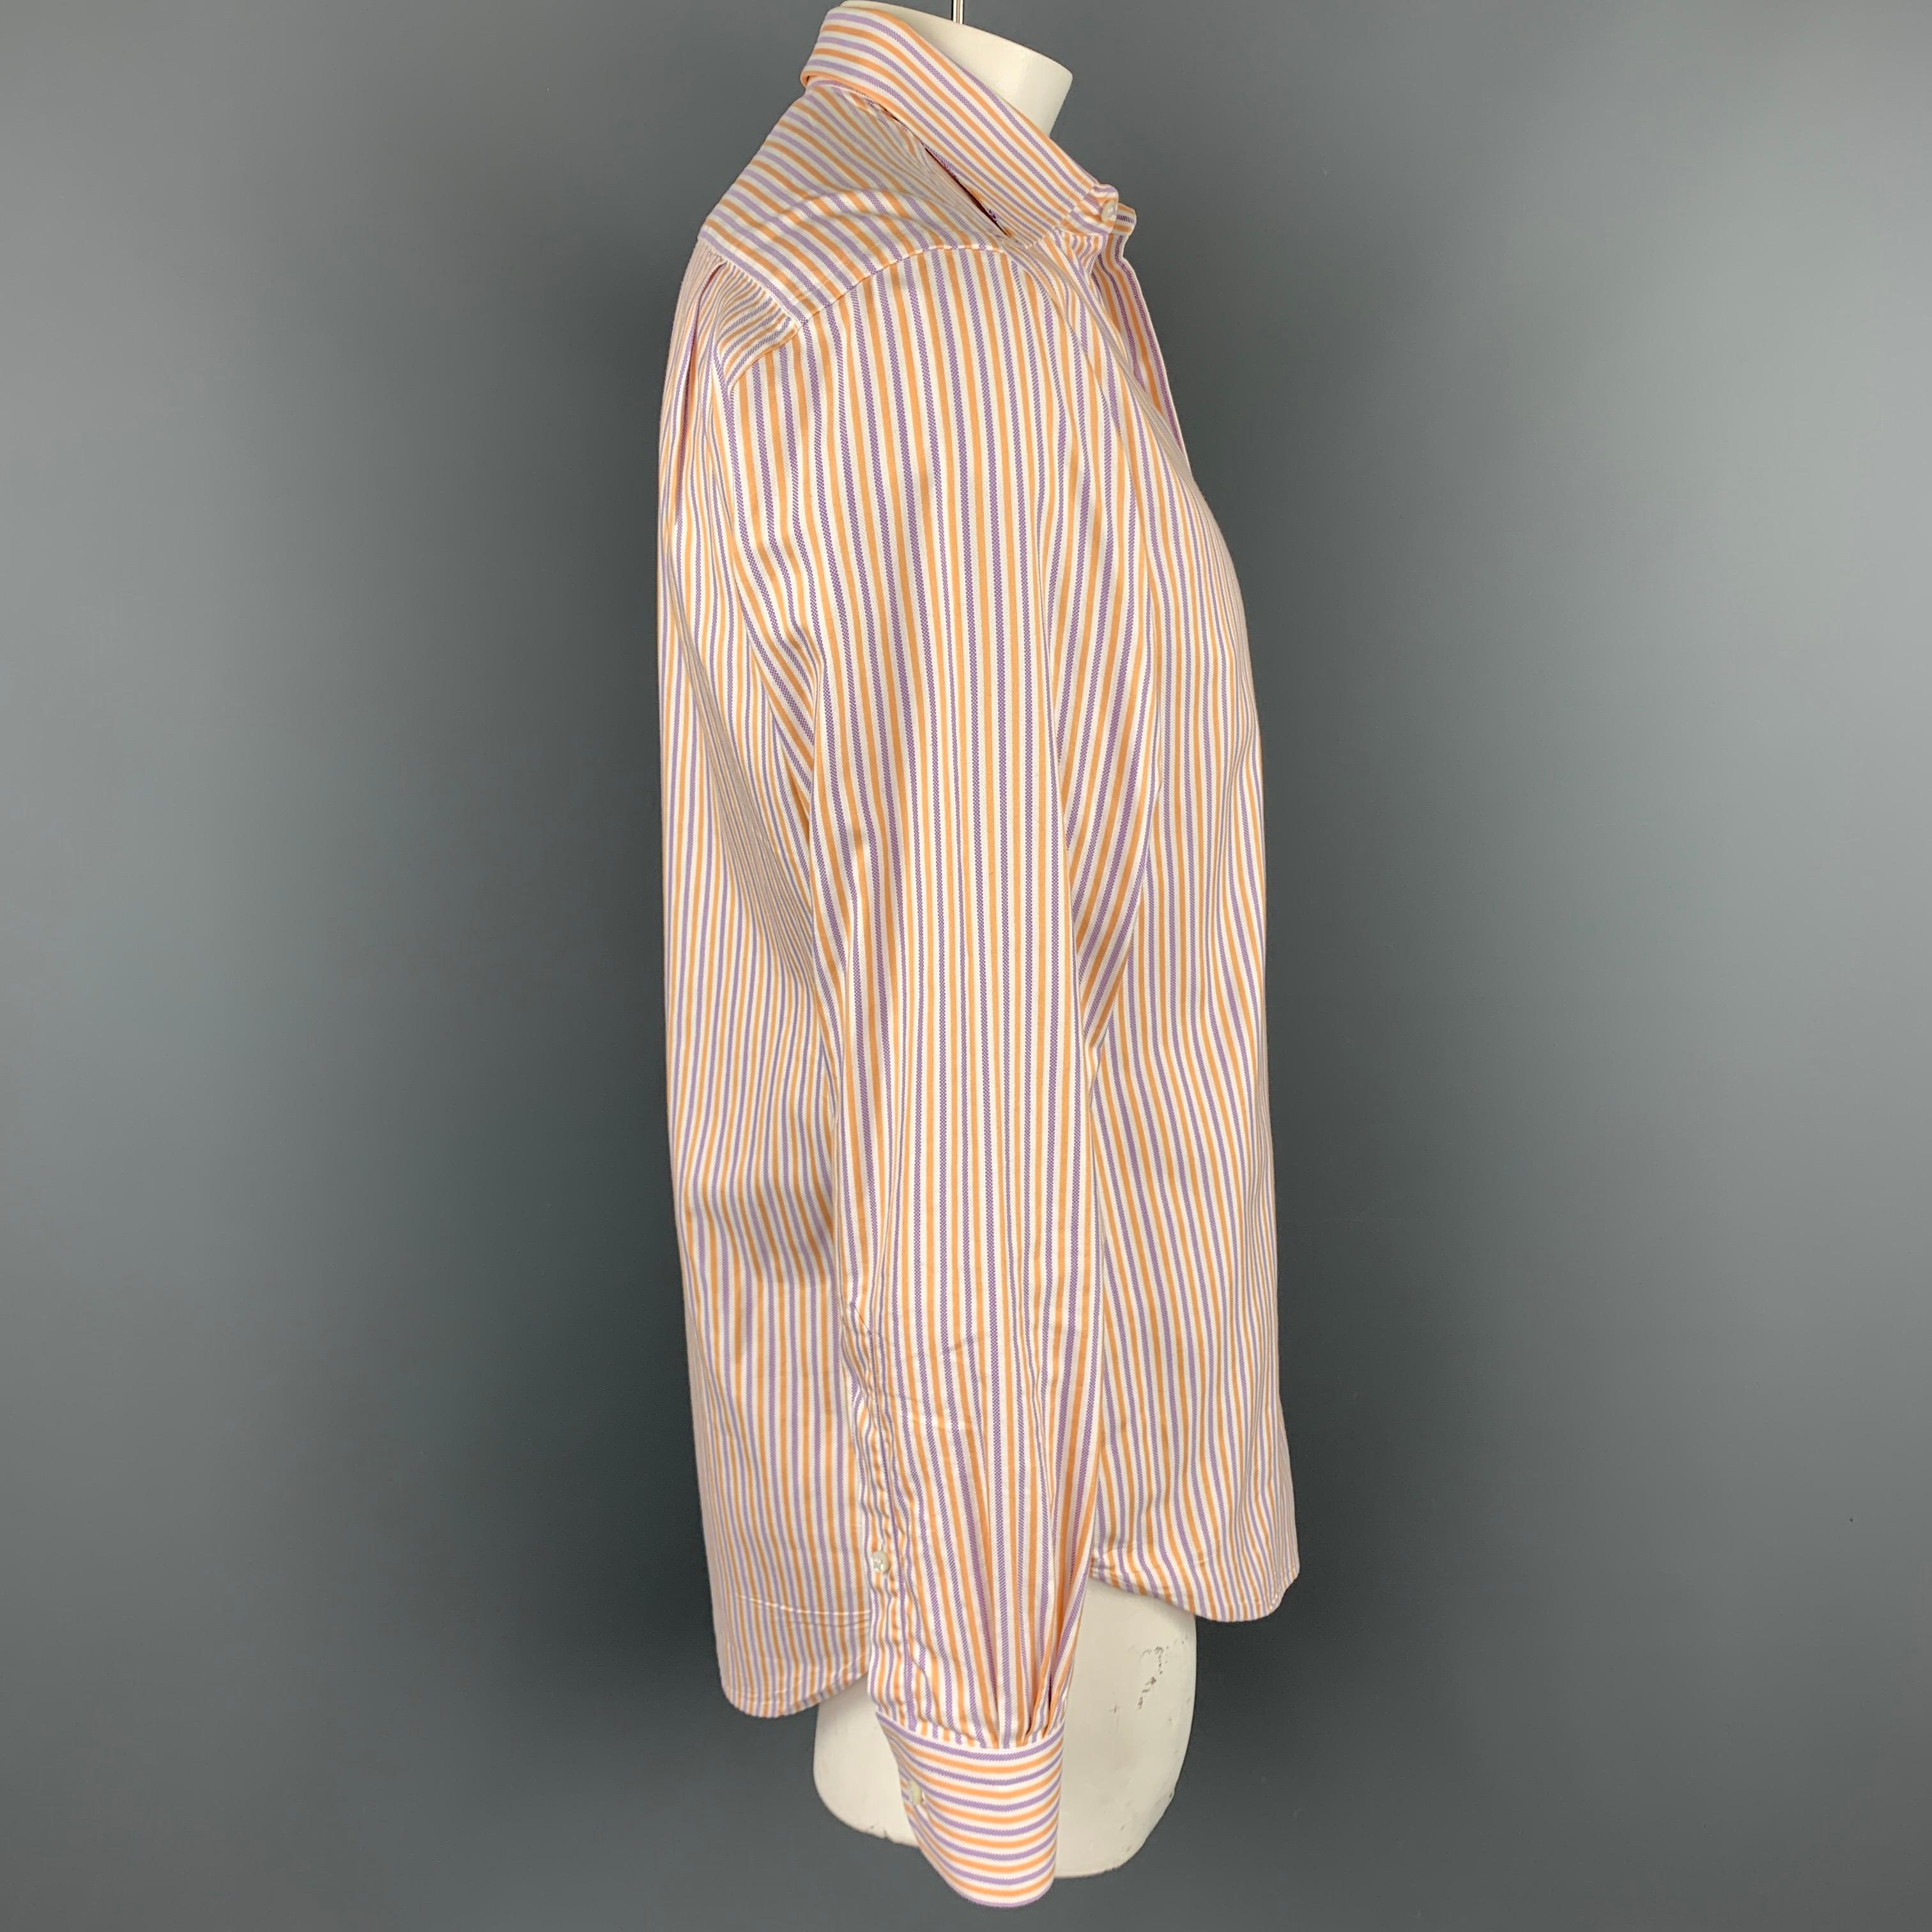 LORO PIANA long sleeve shirt comes in a purple & orange stripe cotton featuring a button up style, front patch pocket, and a spread collar. Made in Italy.

Very Good Pre-Owned Condition.
Marked: 16.5/42

Measurements:

Shoulder: 19 in.
Chest: 46